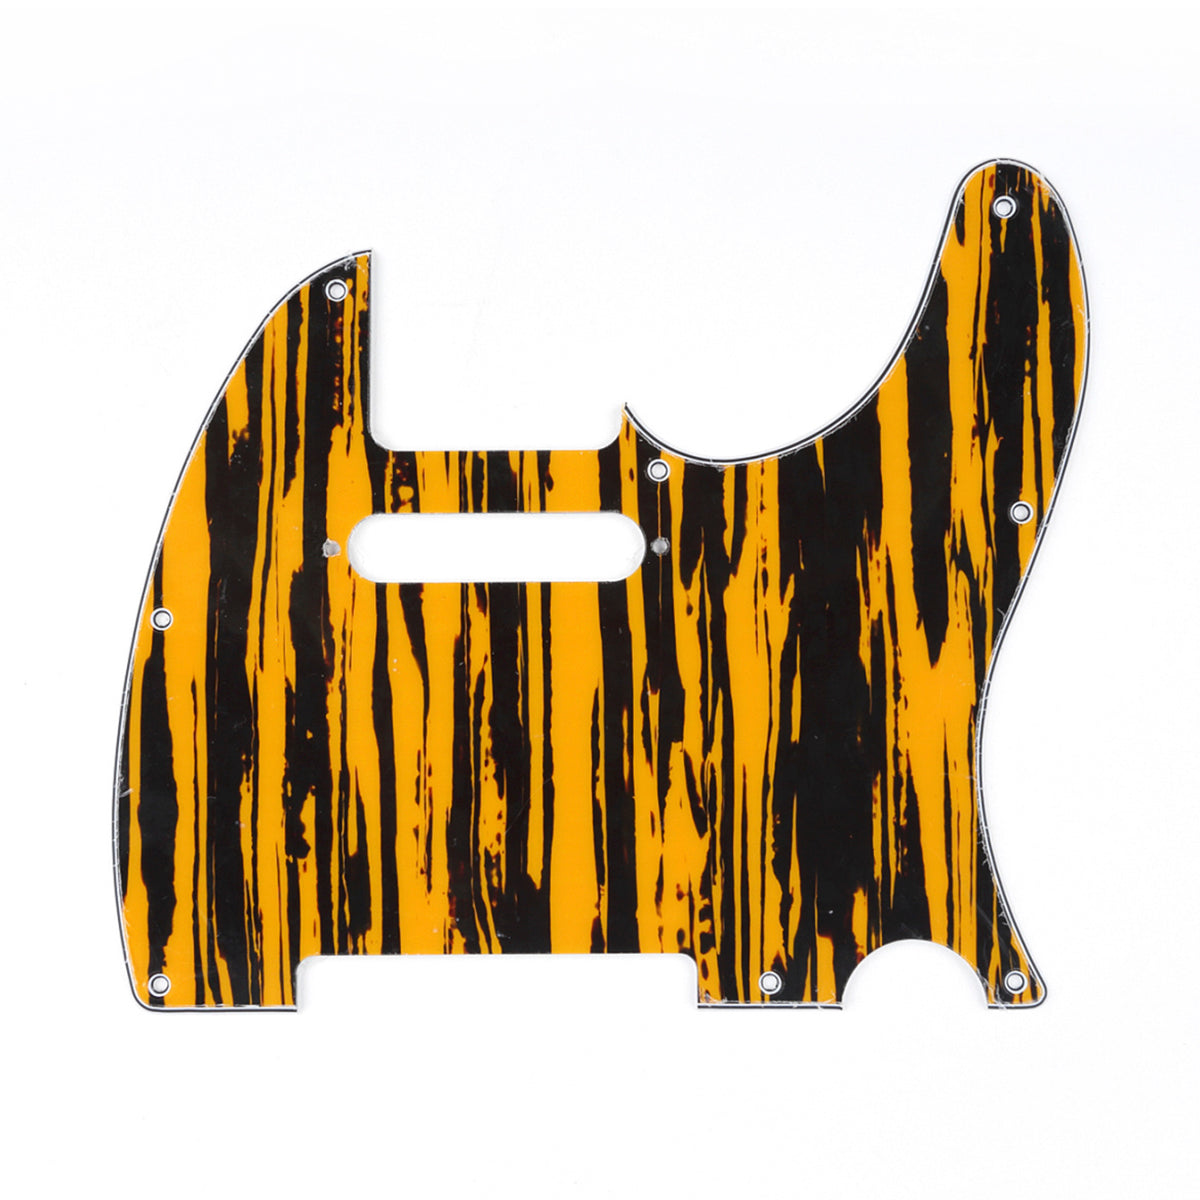 Musiclily 8 Hole Tele Guitar Pickguard for USA/Mexican Made Fender Standard Telecaster Modern Style, 4Ply Yellow Black